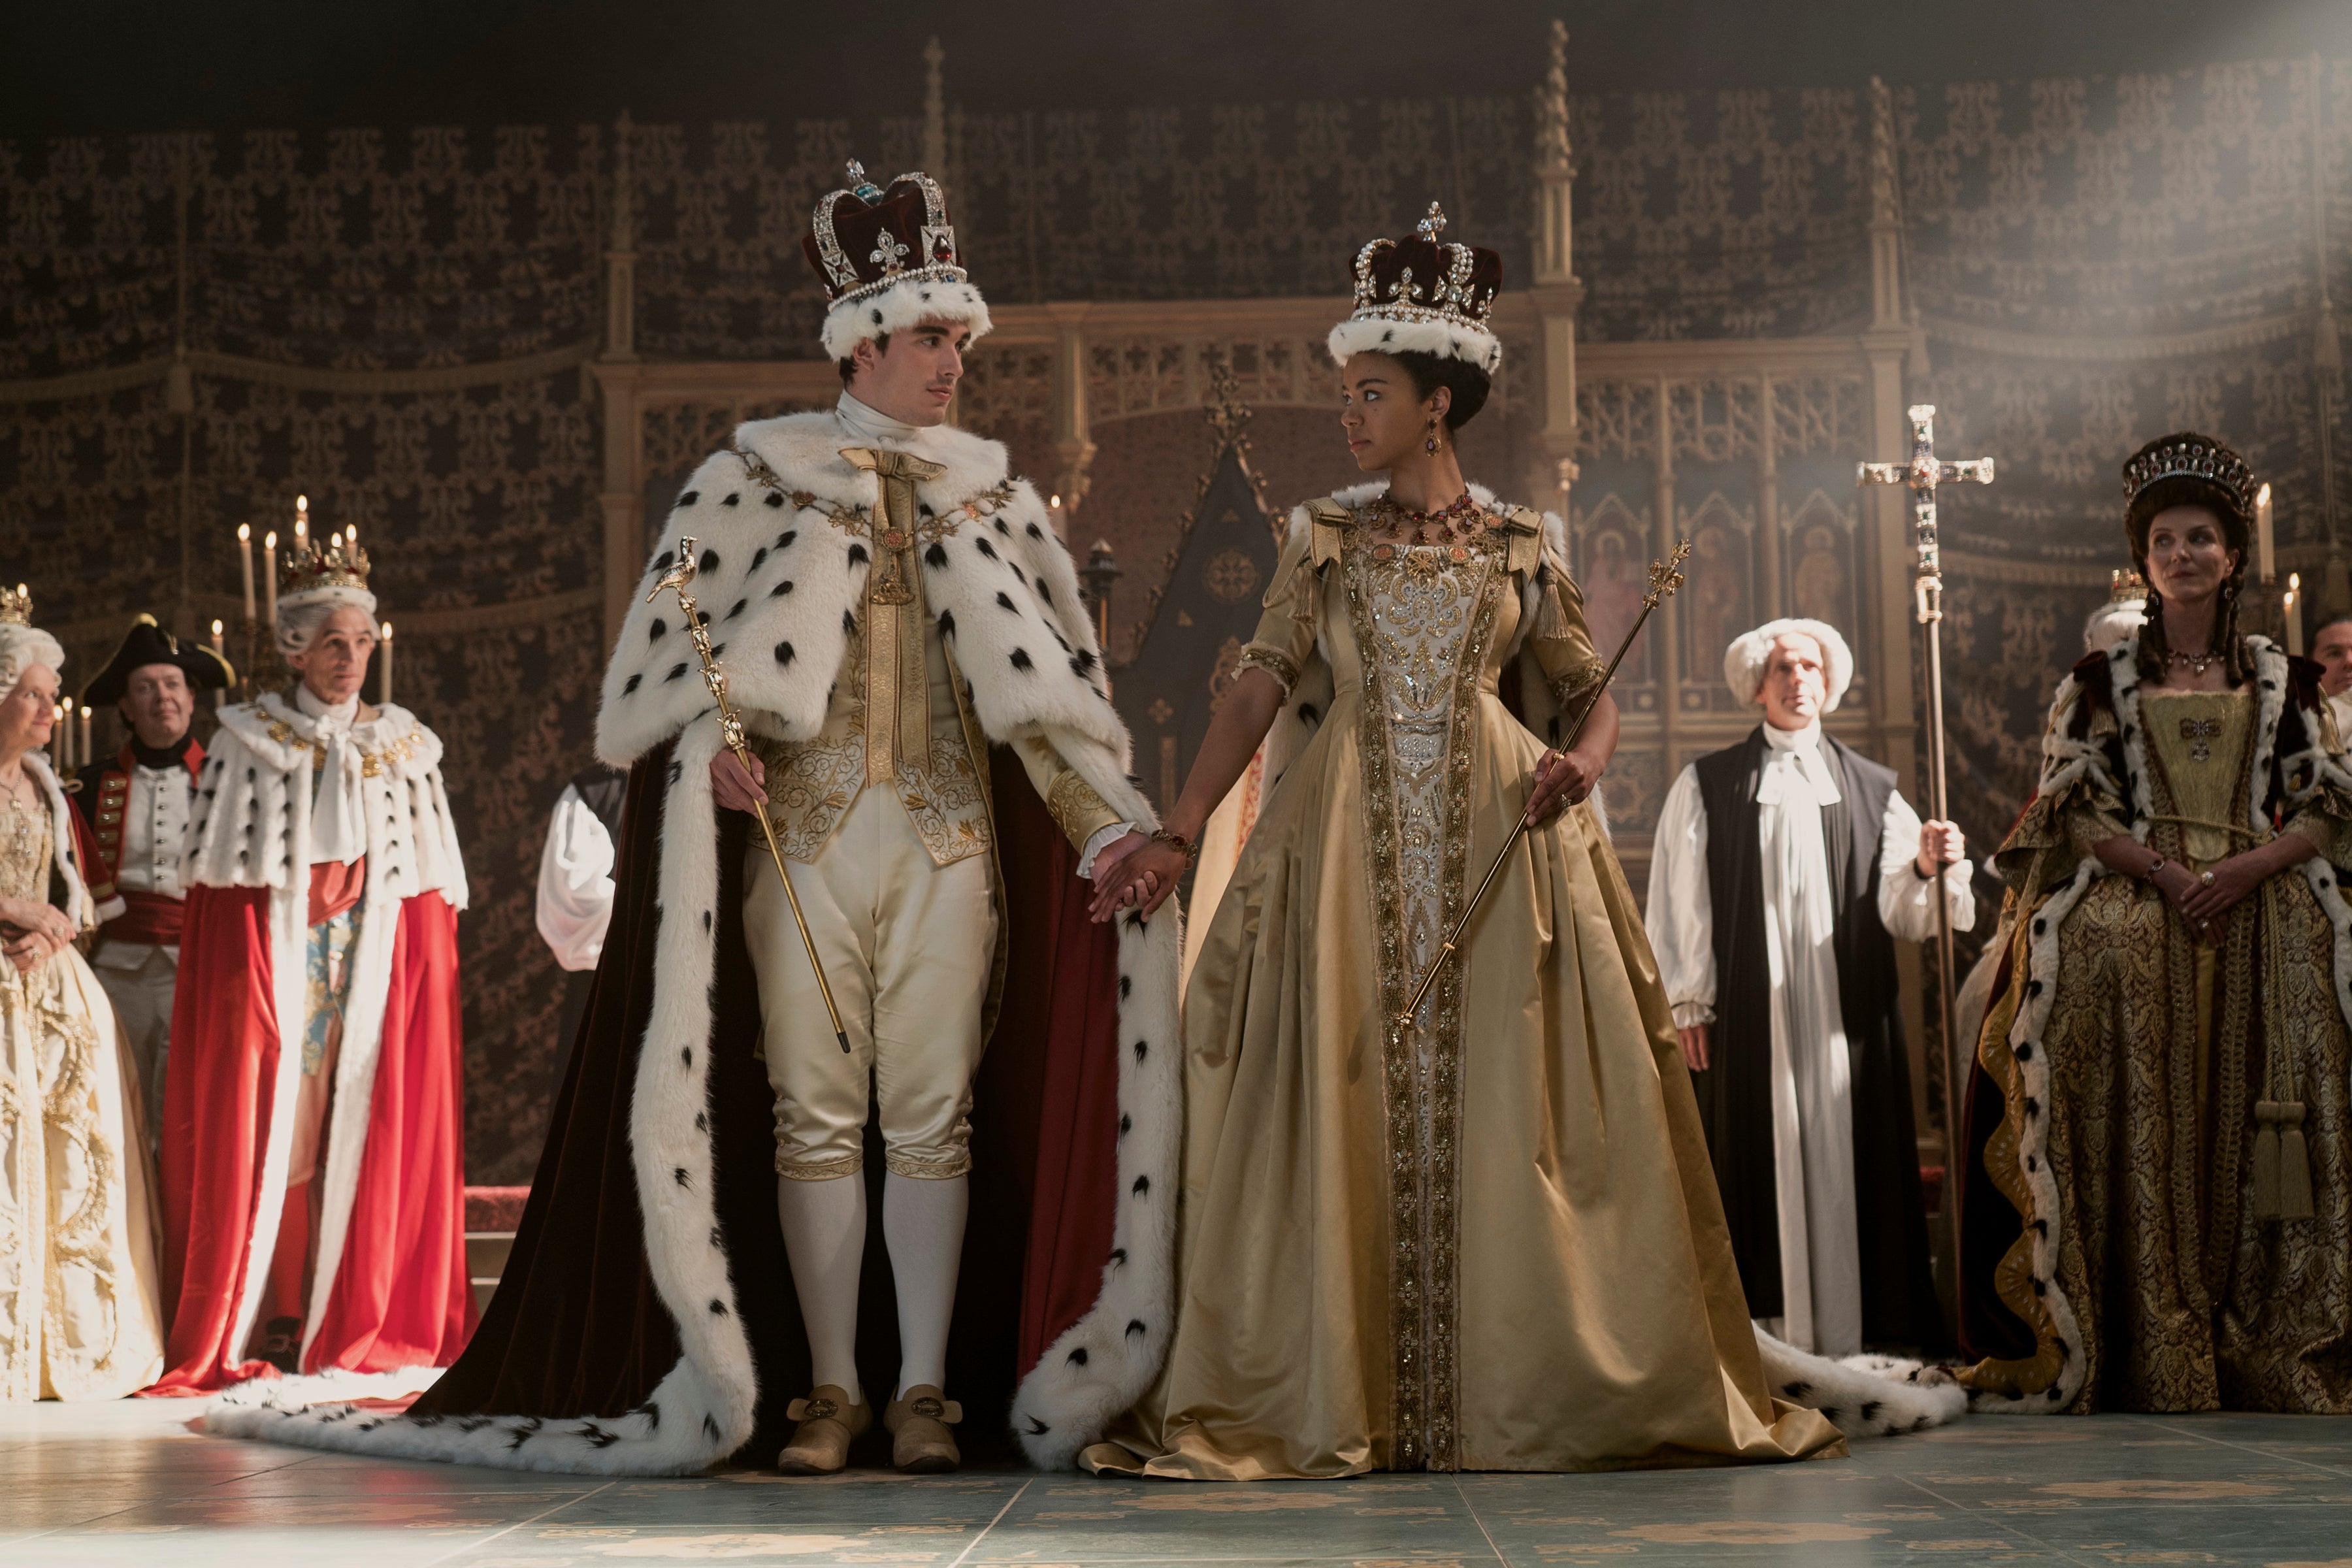 A white king and a Black queen stand at a coronation.